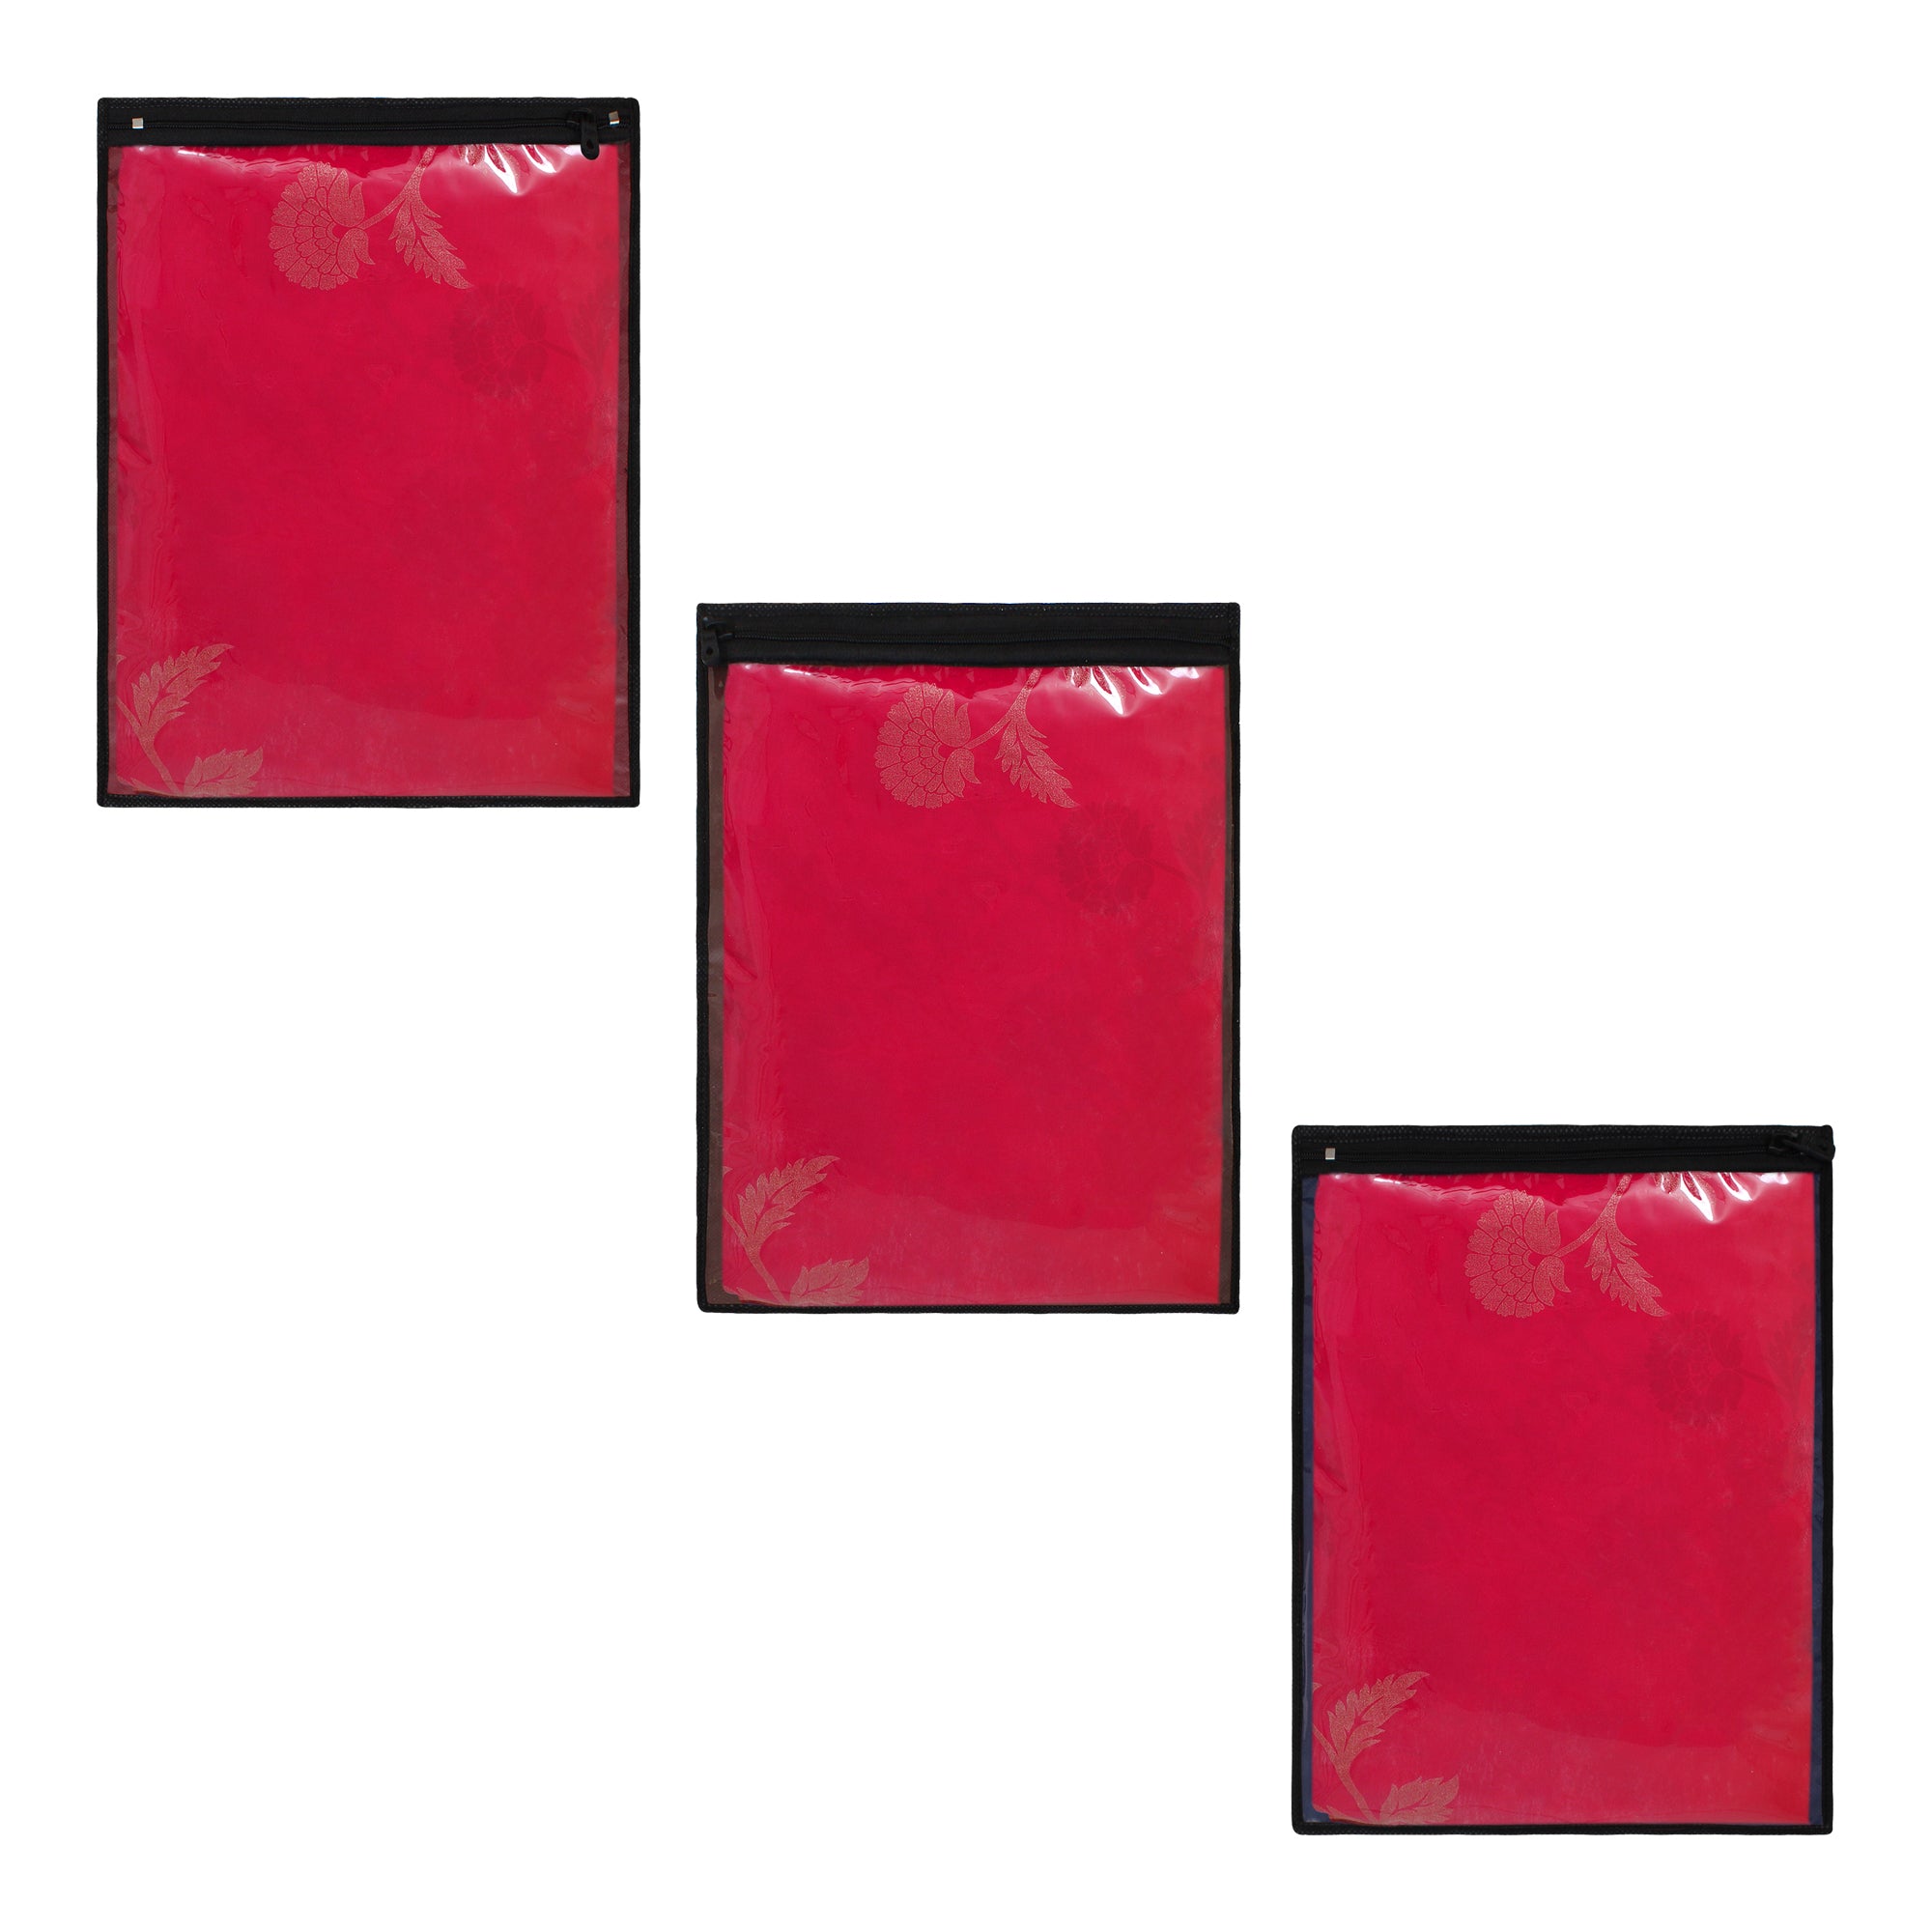 Saree Cover Transparent Storage Bag with Zip, Set of 3, Dark - Dream Care Furnishings Private Limited